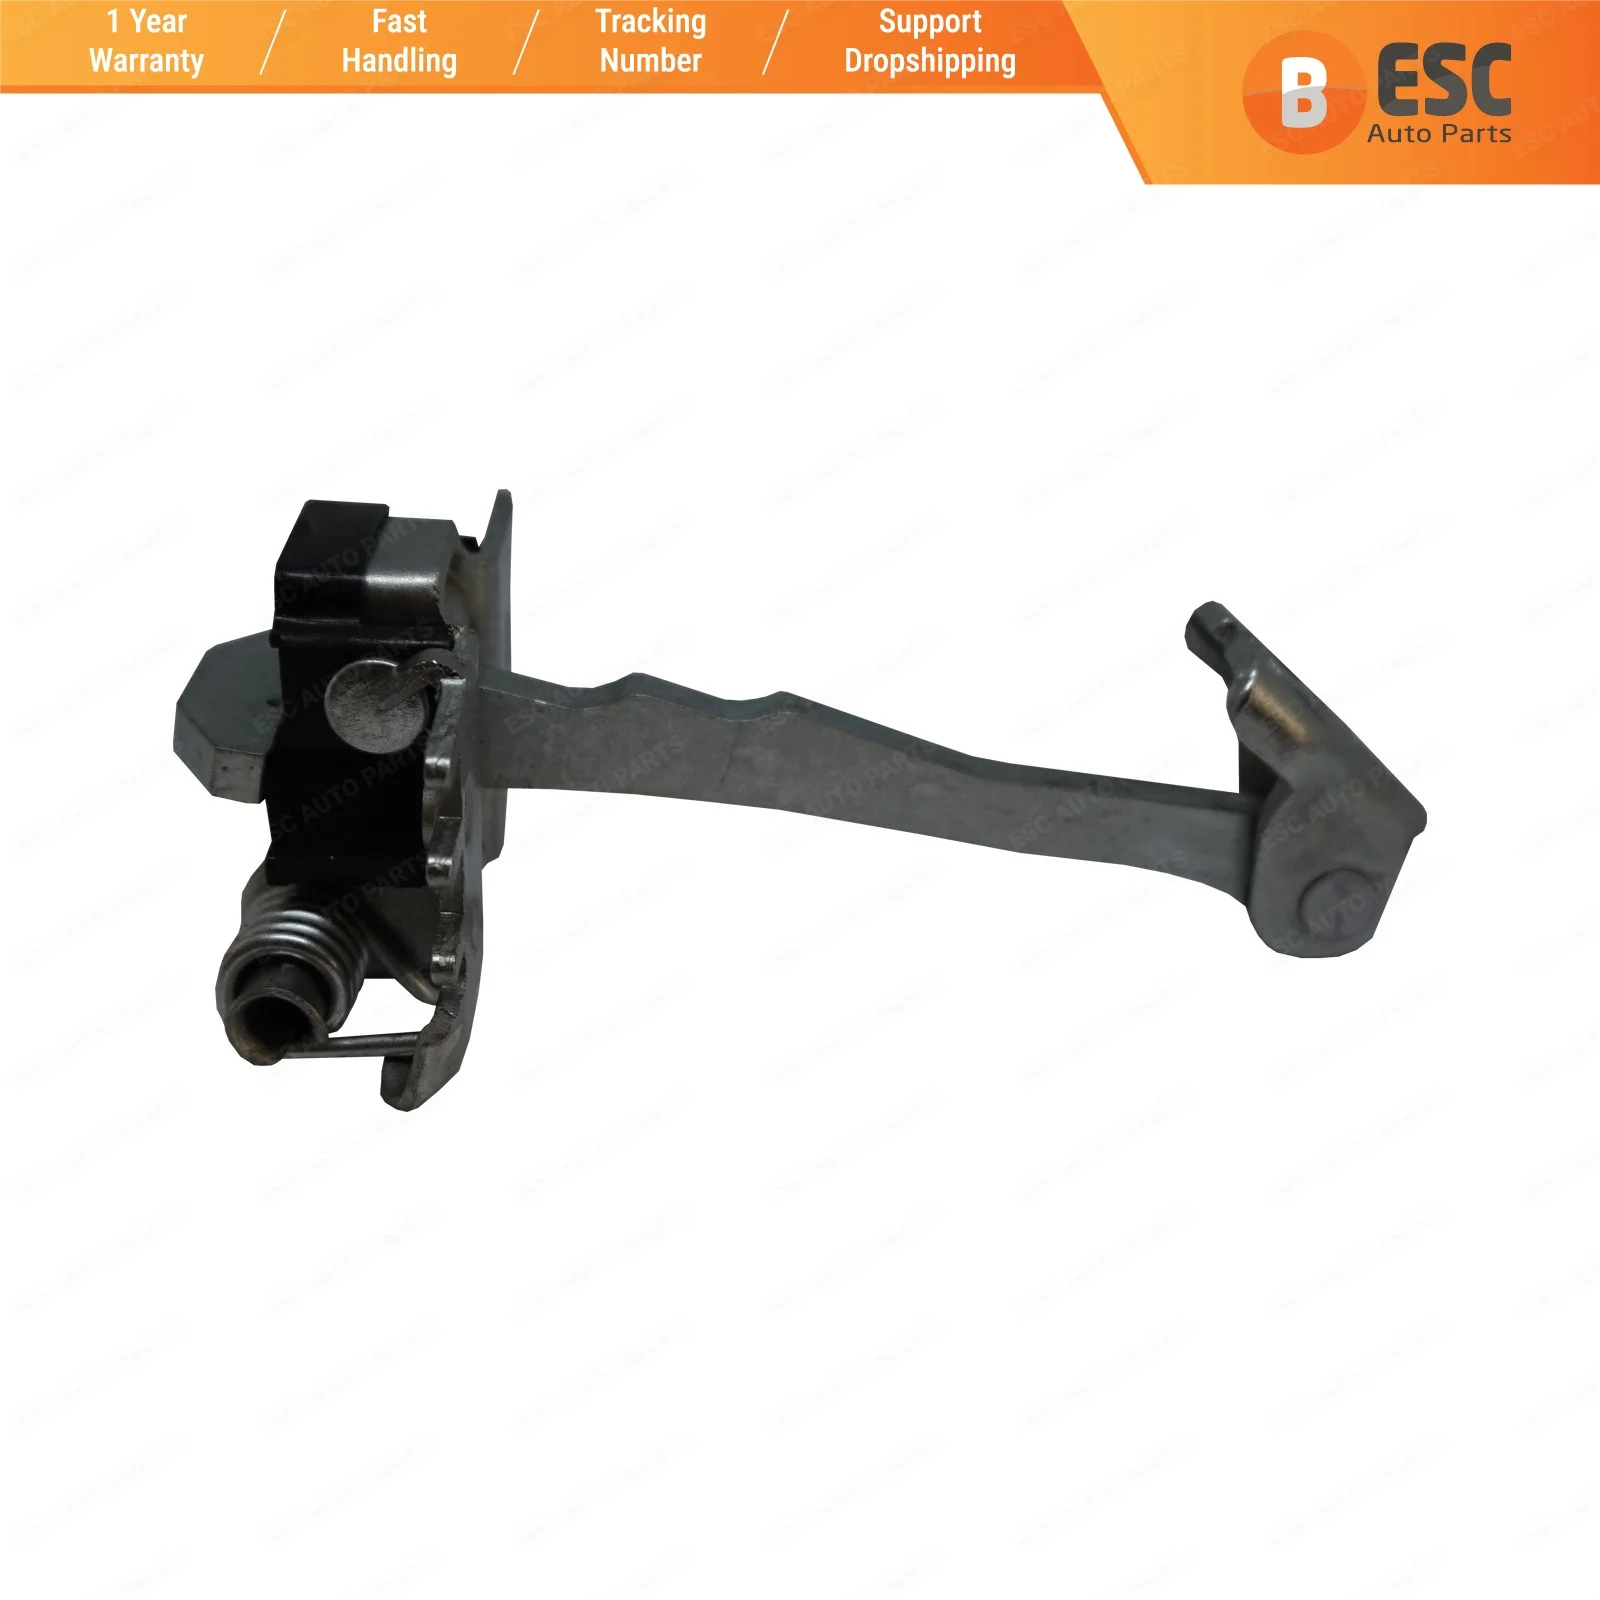 

ESC Auto Parts EDP709 Rear Door Hinge Stop Check Strap Limiter 824300003R for Renault Fluence Megane 3 Ship From Turkey